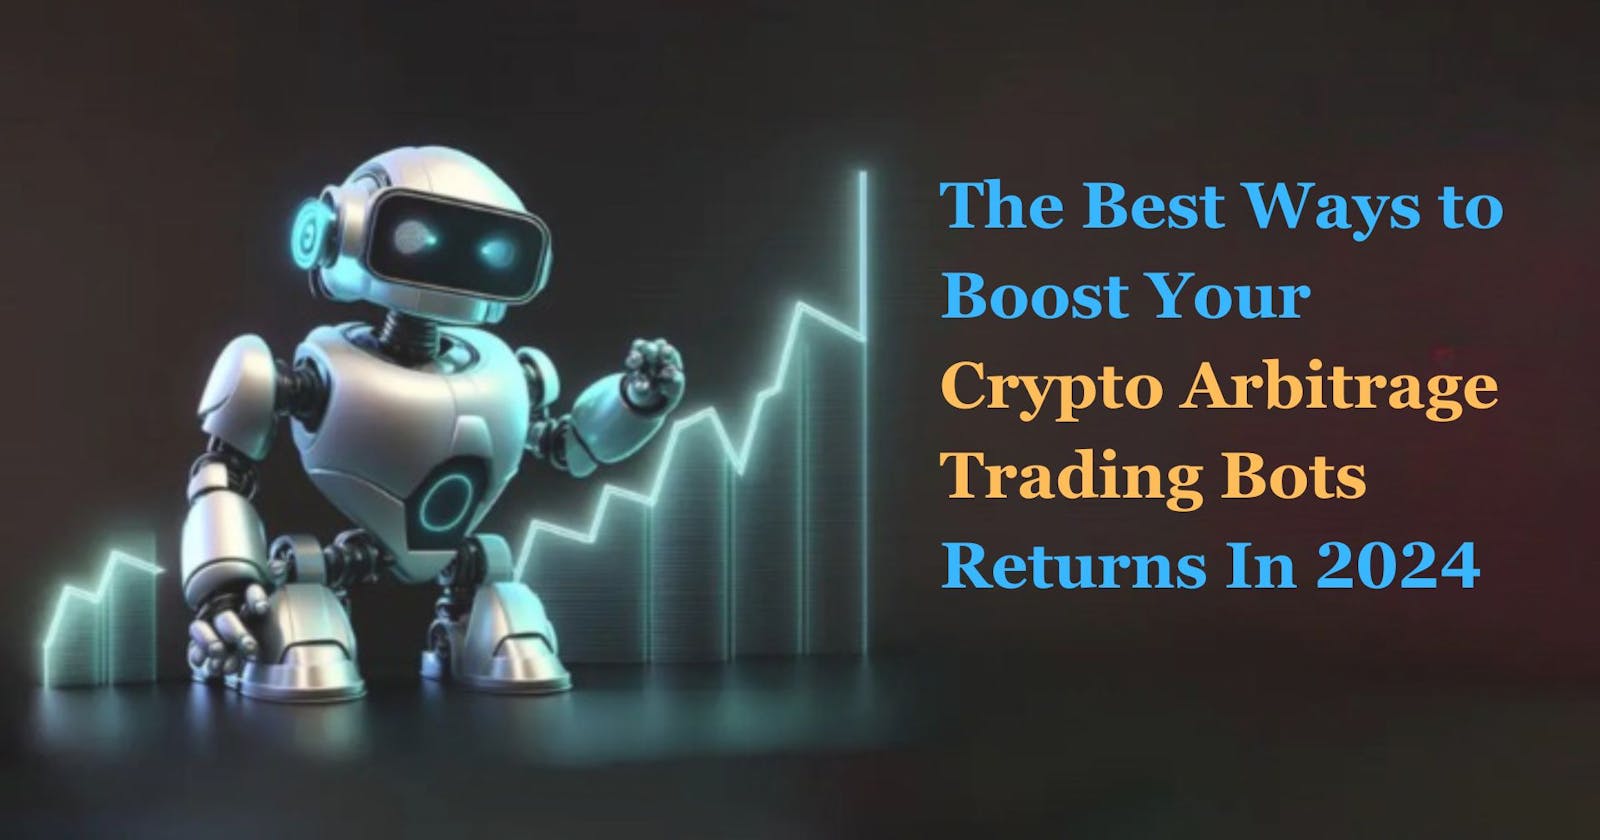 The Best Ways to Boost Your Crypto Arbitrage Trading Bots Returns In 2024